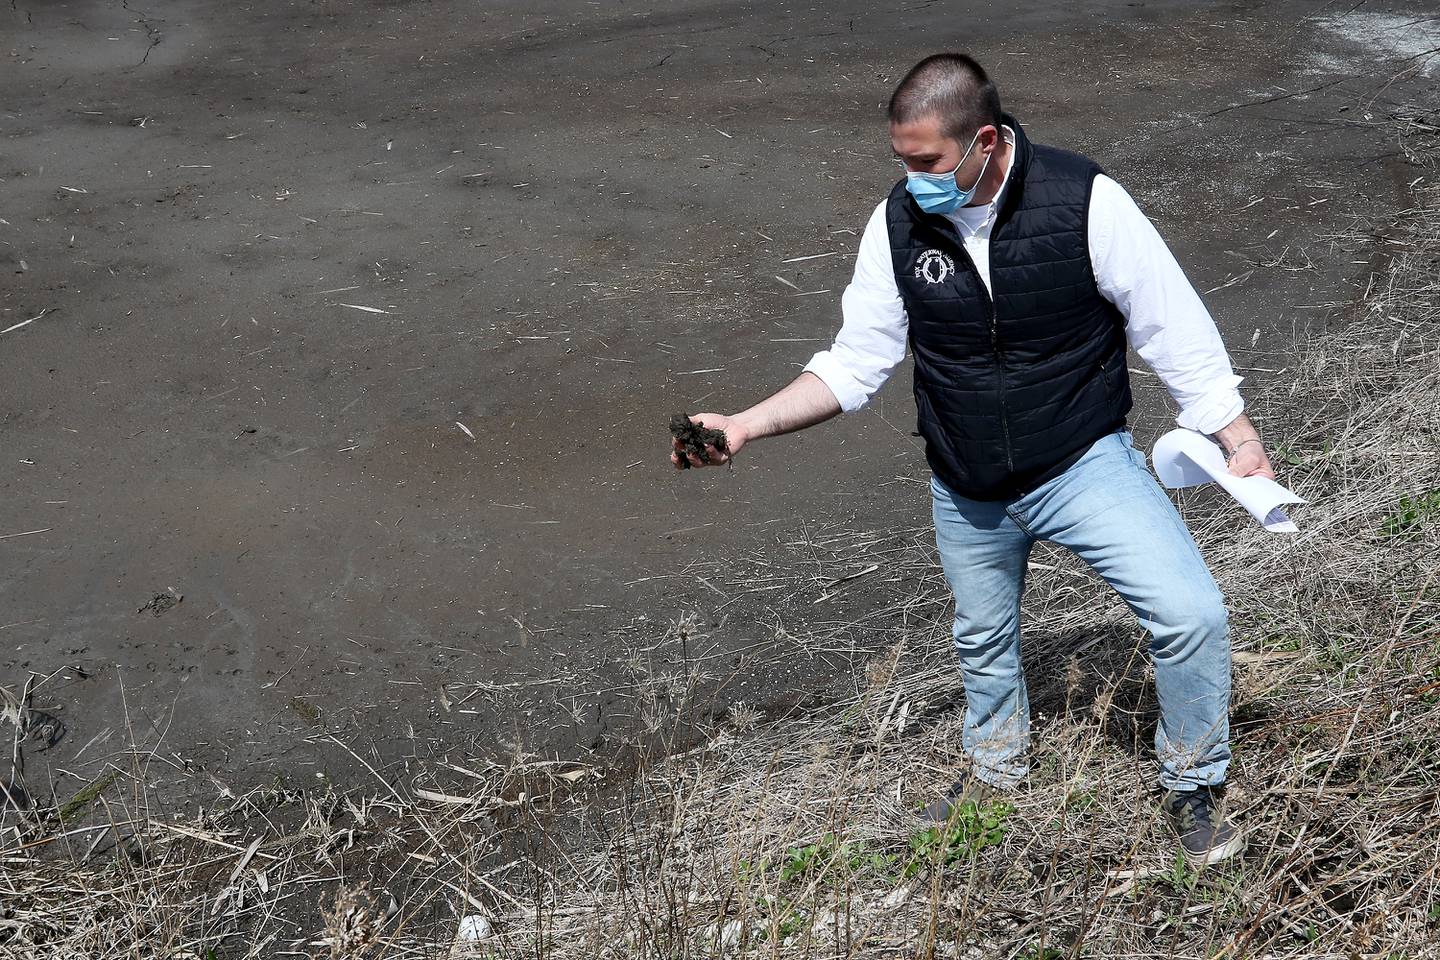 Fox Waterway Agency Executive Director Joe Keller crumbles some nutrient-rich sediment in his hands at the Cooper Farm Sediment Dewatering Facility on Tuesday, April 13, 2021, in Antioch.